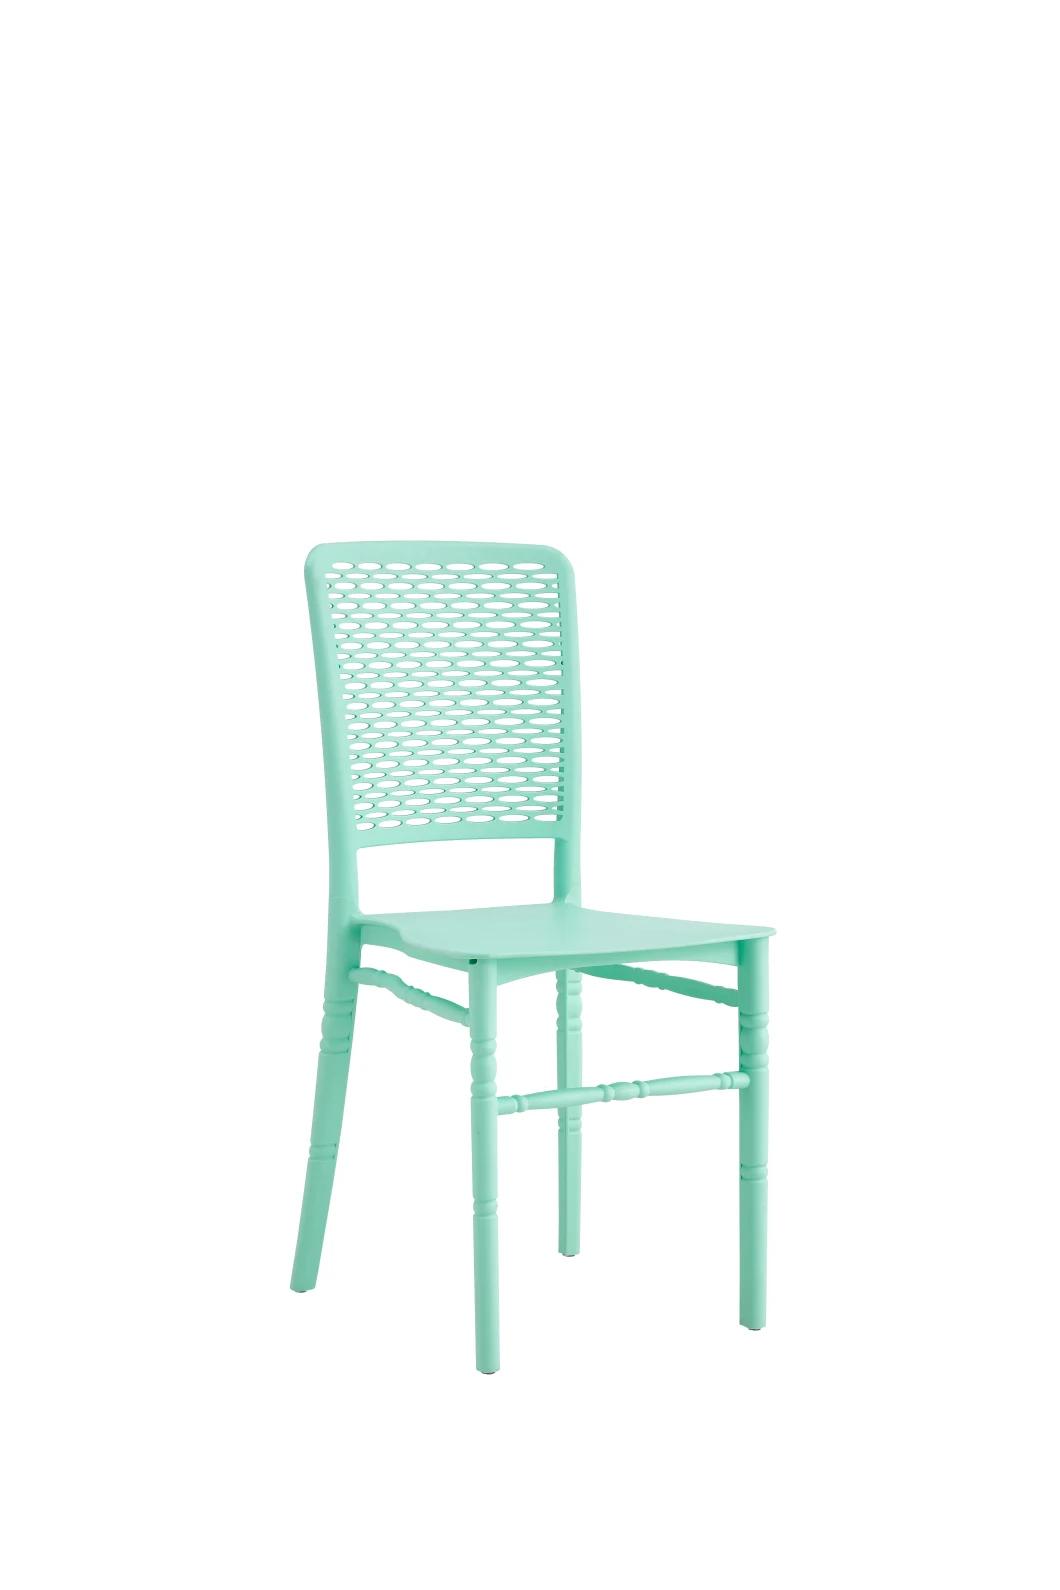 Wholesale Factory Price New Design Portable Dining Garden Stackable Chair, Outdoor White Plastic Chair